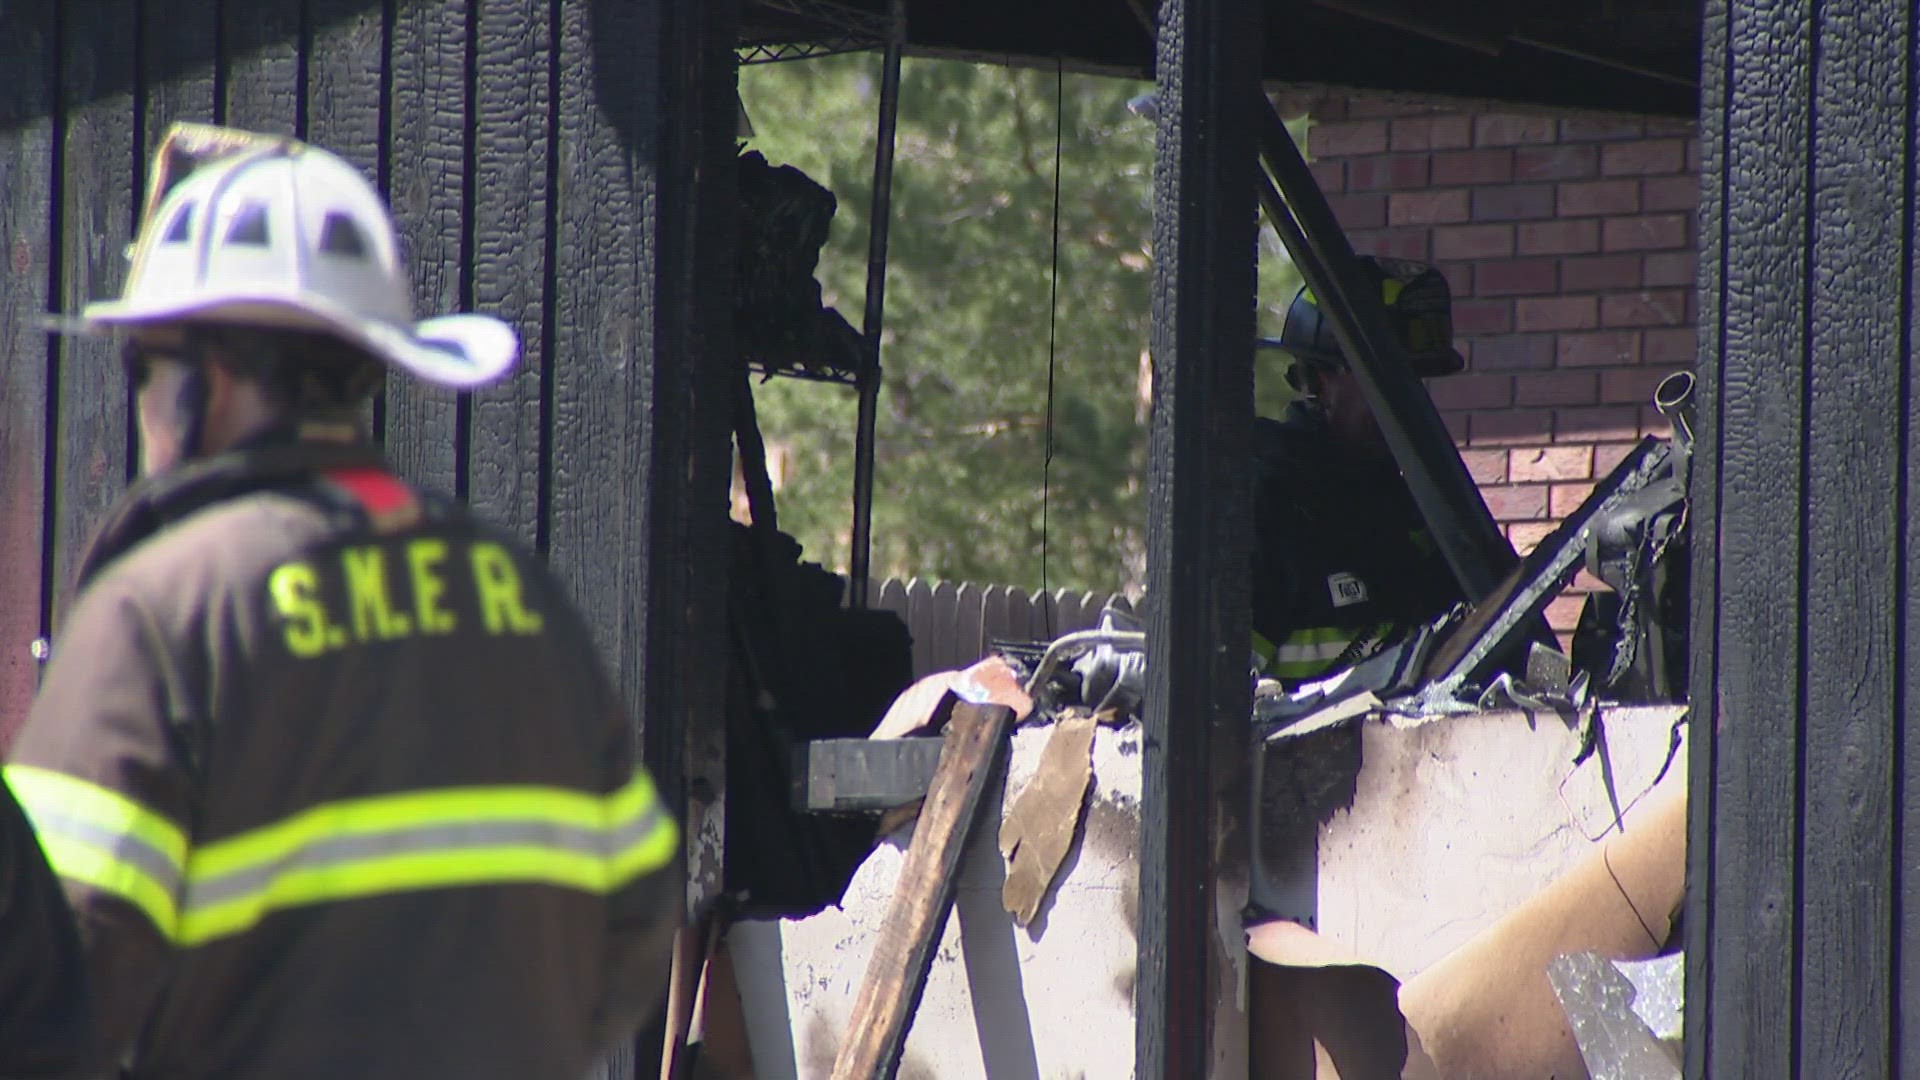 South Metro Fire Rescue said the fire at a Littleton home started in the garage and spread to part of the home Sunday morning.